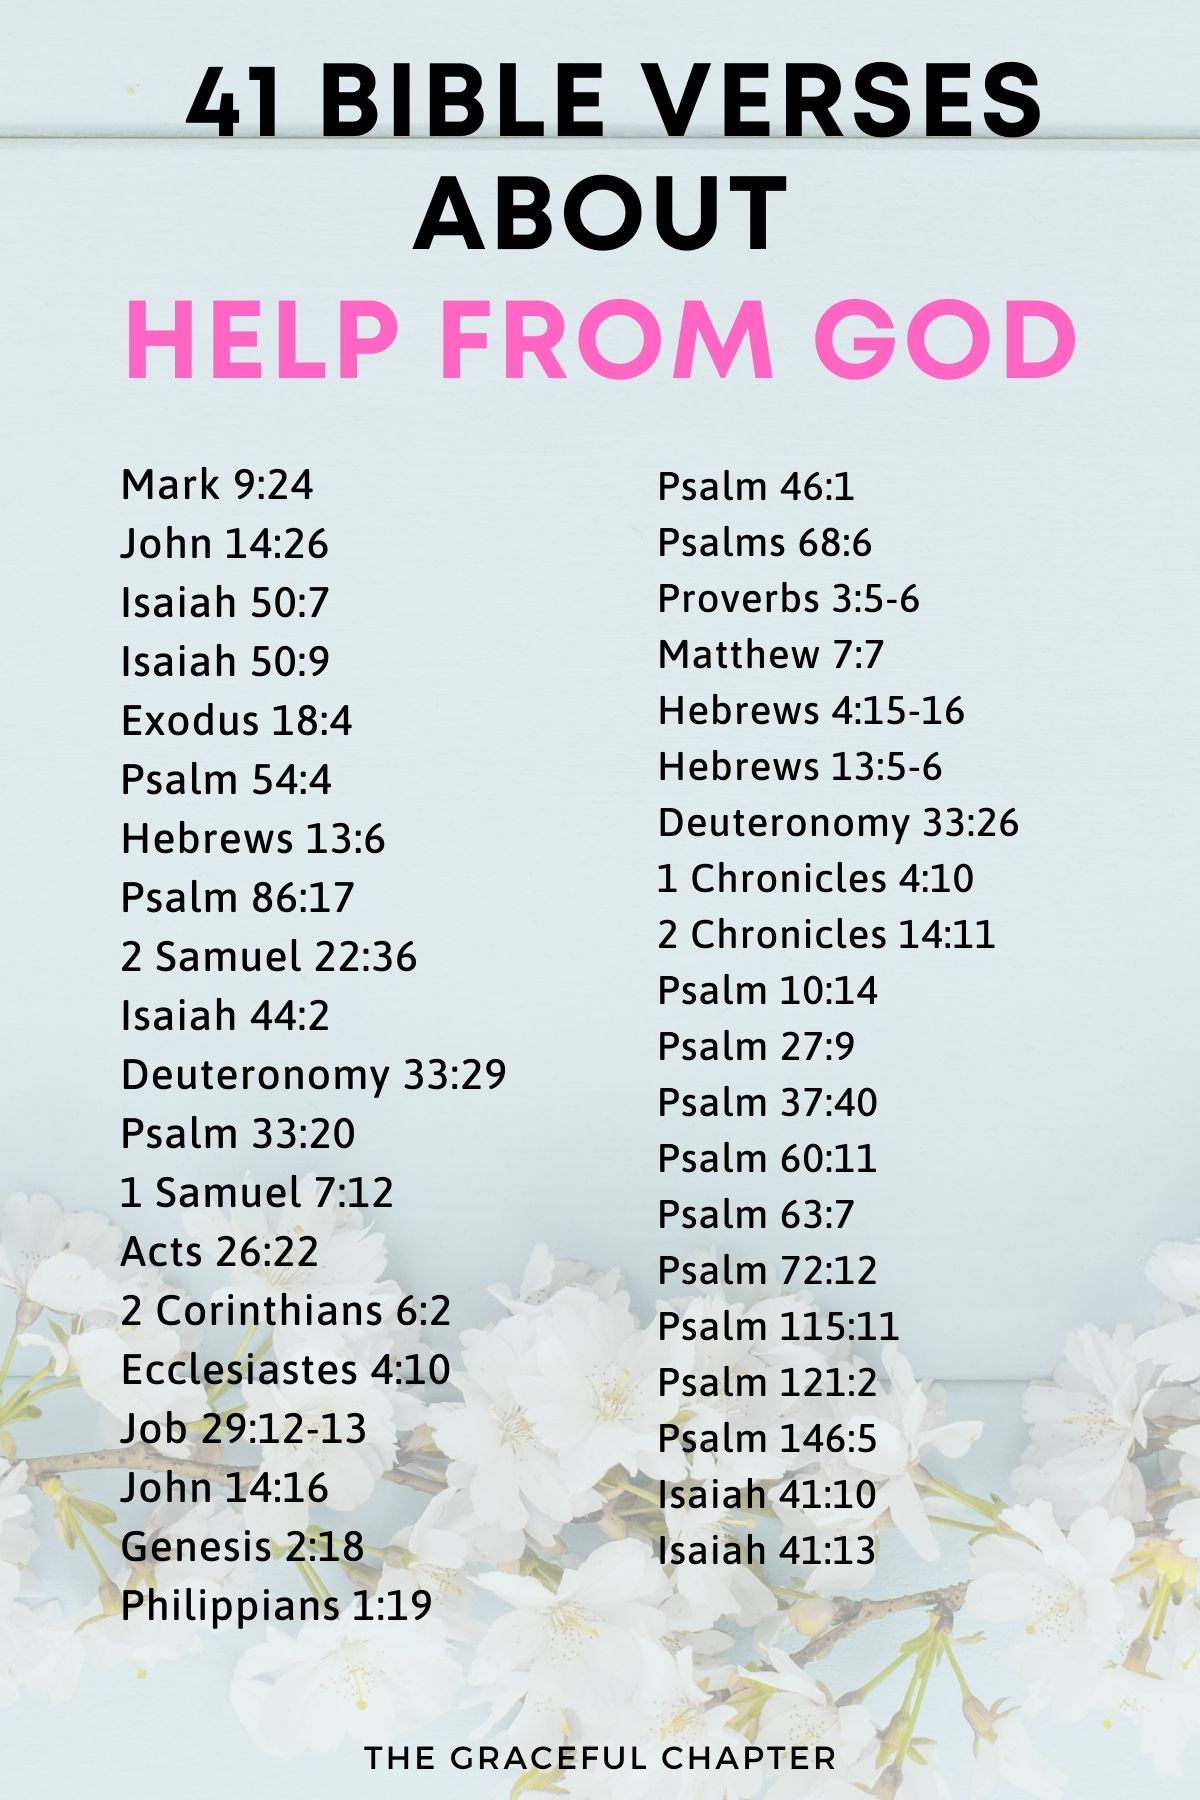 Bible verses about help from God